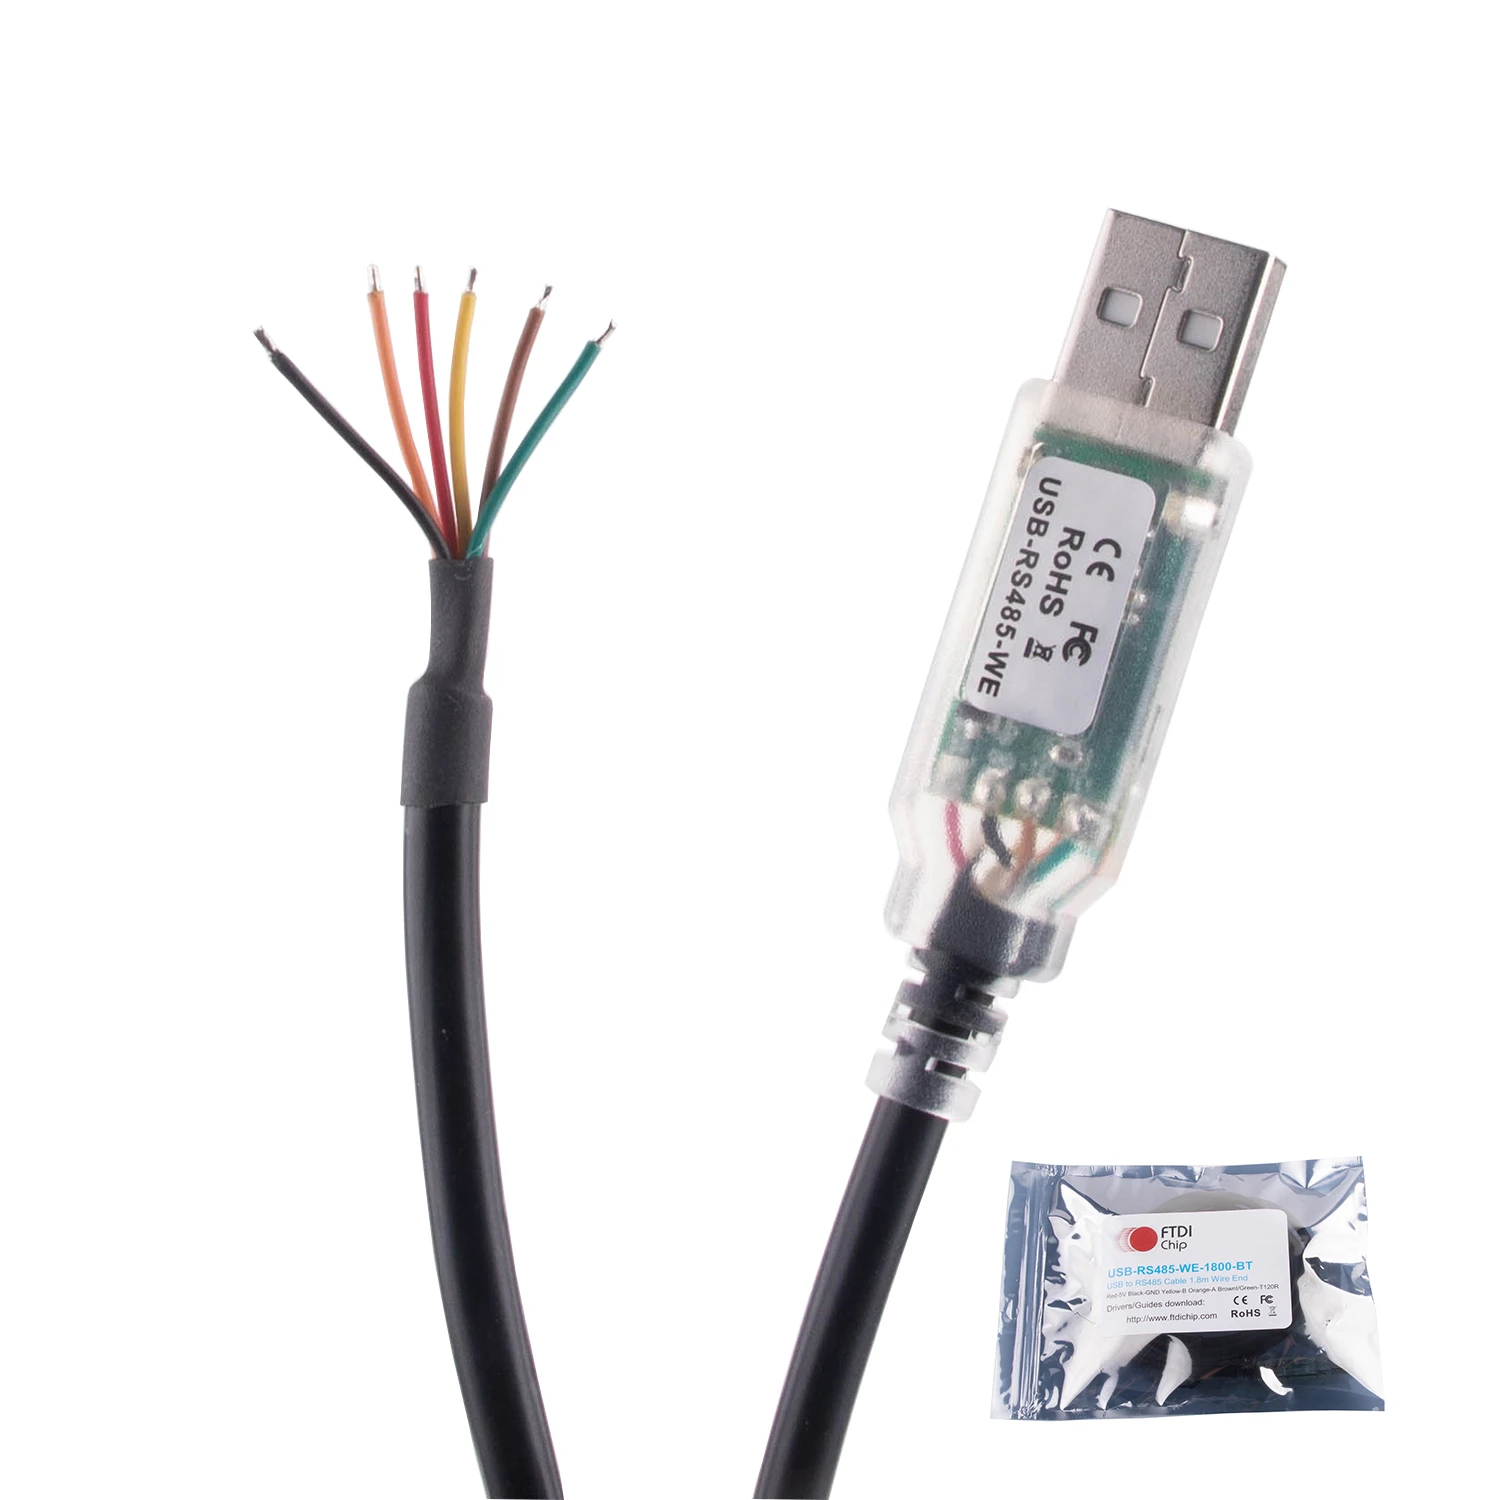 USB to RS485 Serial Port Converter Adapter Cable 6Pin Wire End FTDI Chip  Supports Windows 10 8 7 XP and Mac OS|Computer Cables & Connectors| -  AliExpress